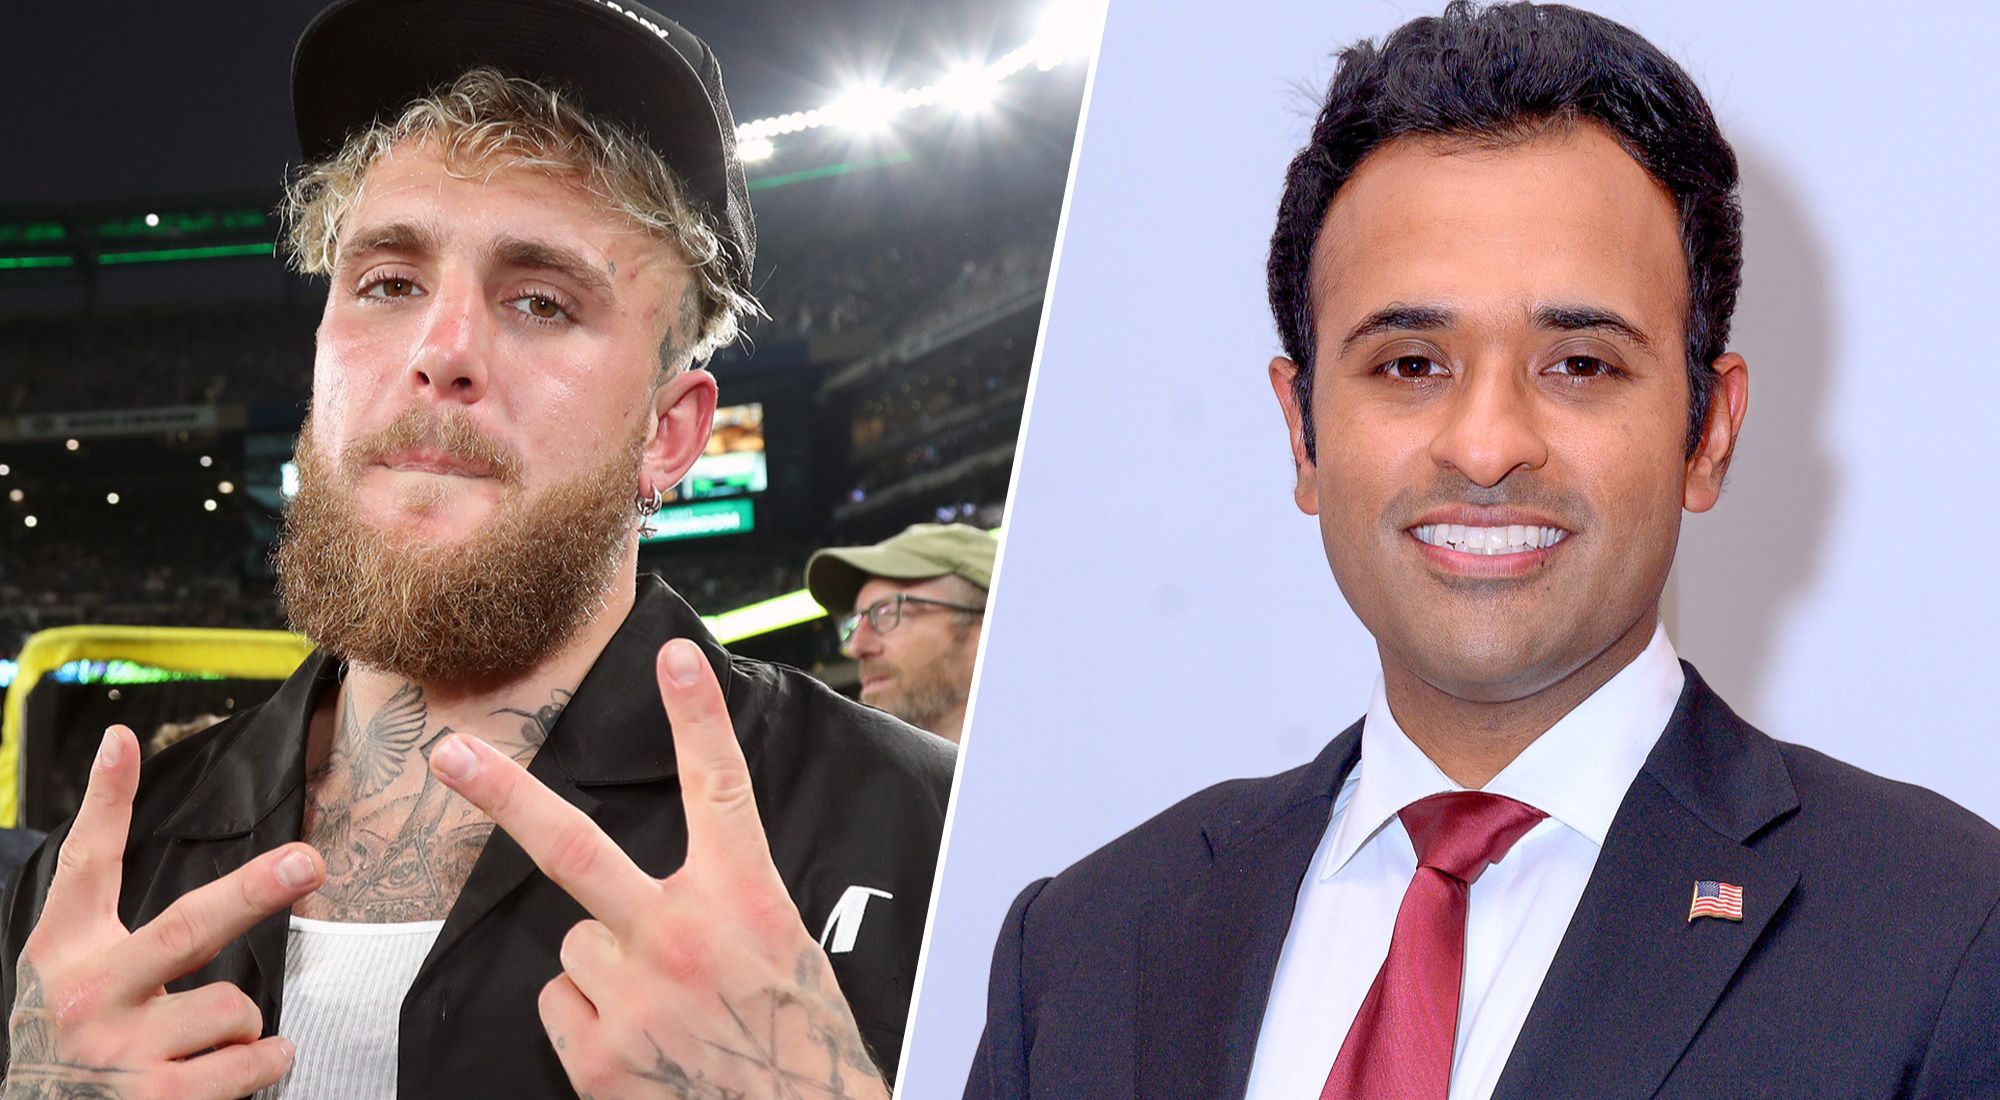 Jake Paul Collaborates With Vivek Ramaswamy In TikTok Endorsement And Criticizes Other Candidates